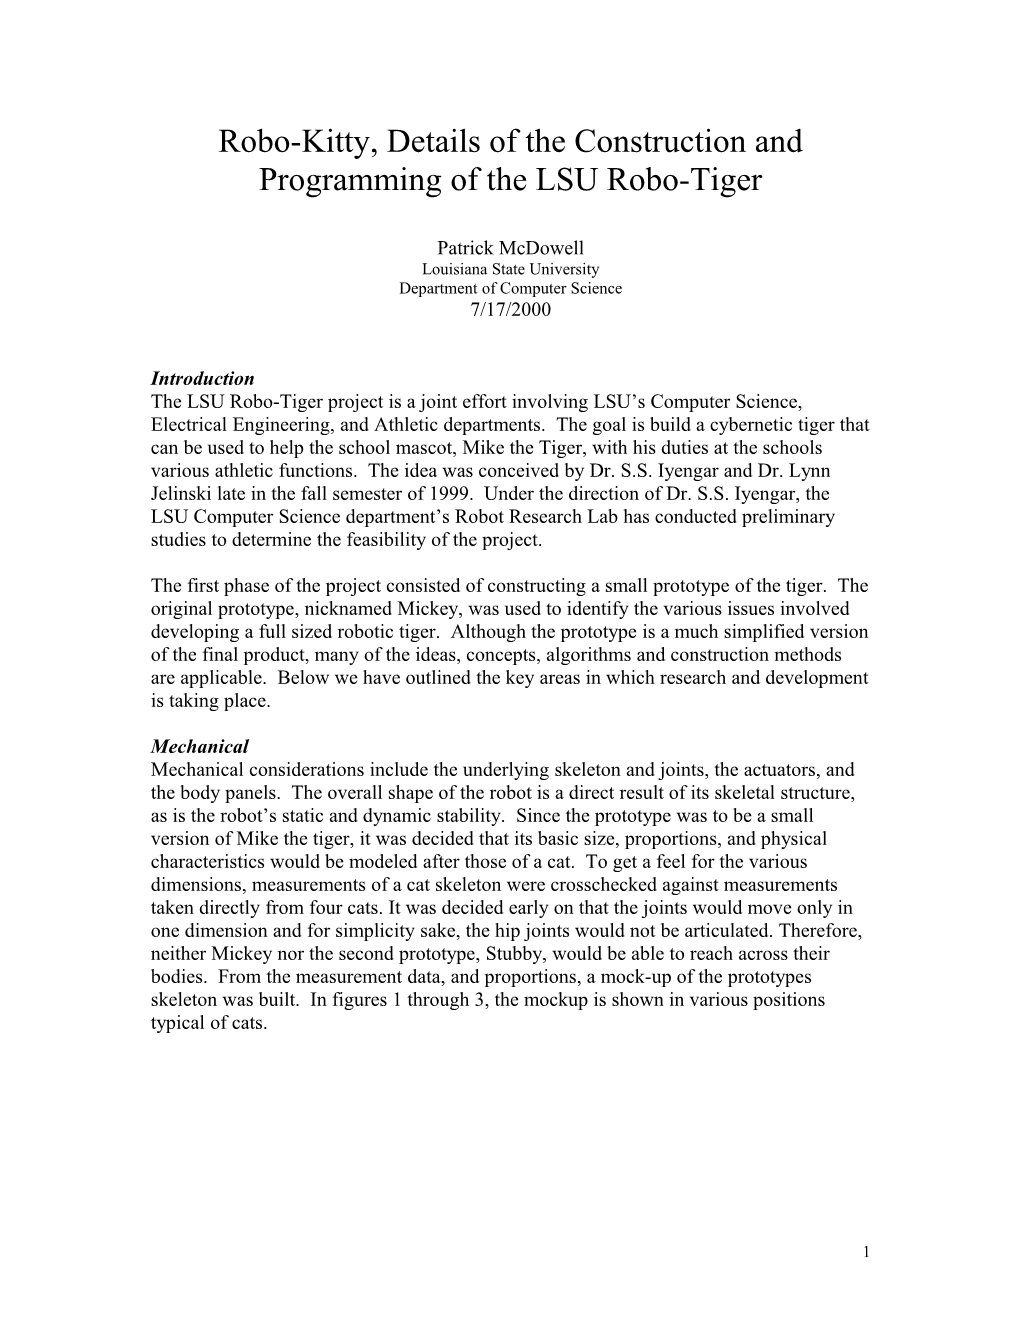 Robo-Kitty, Details of the Construction and Programming of the LSU Robo-Tiger